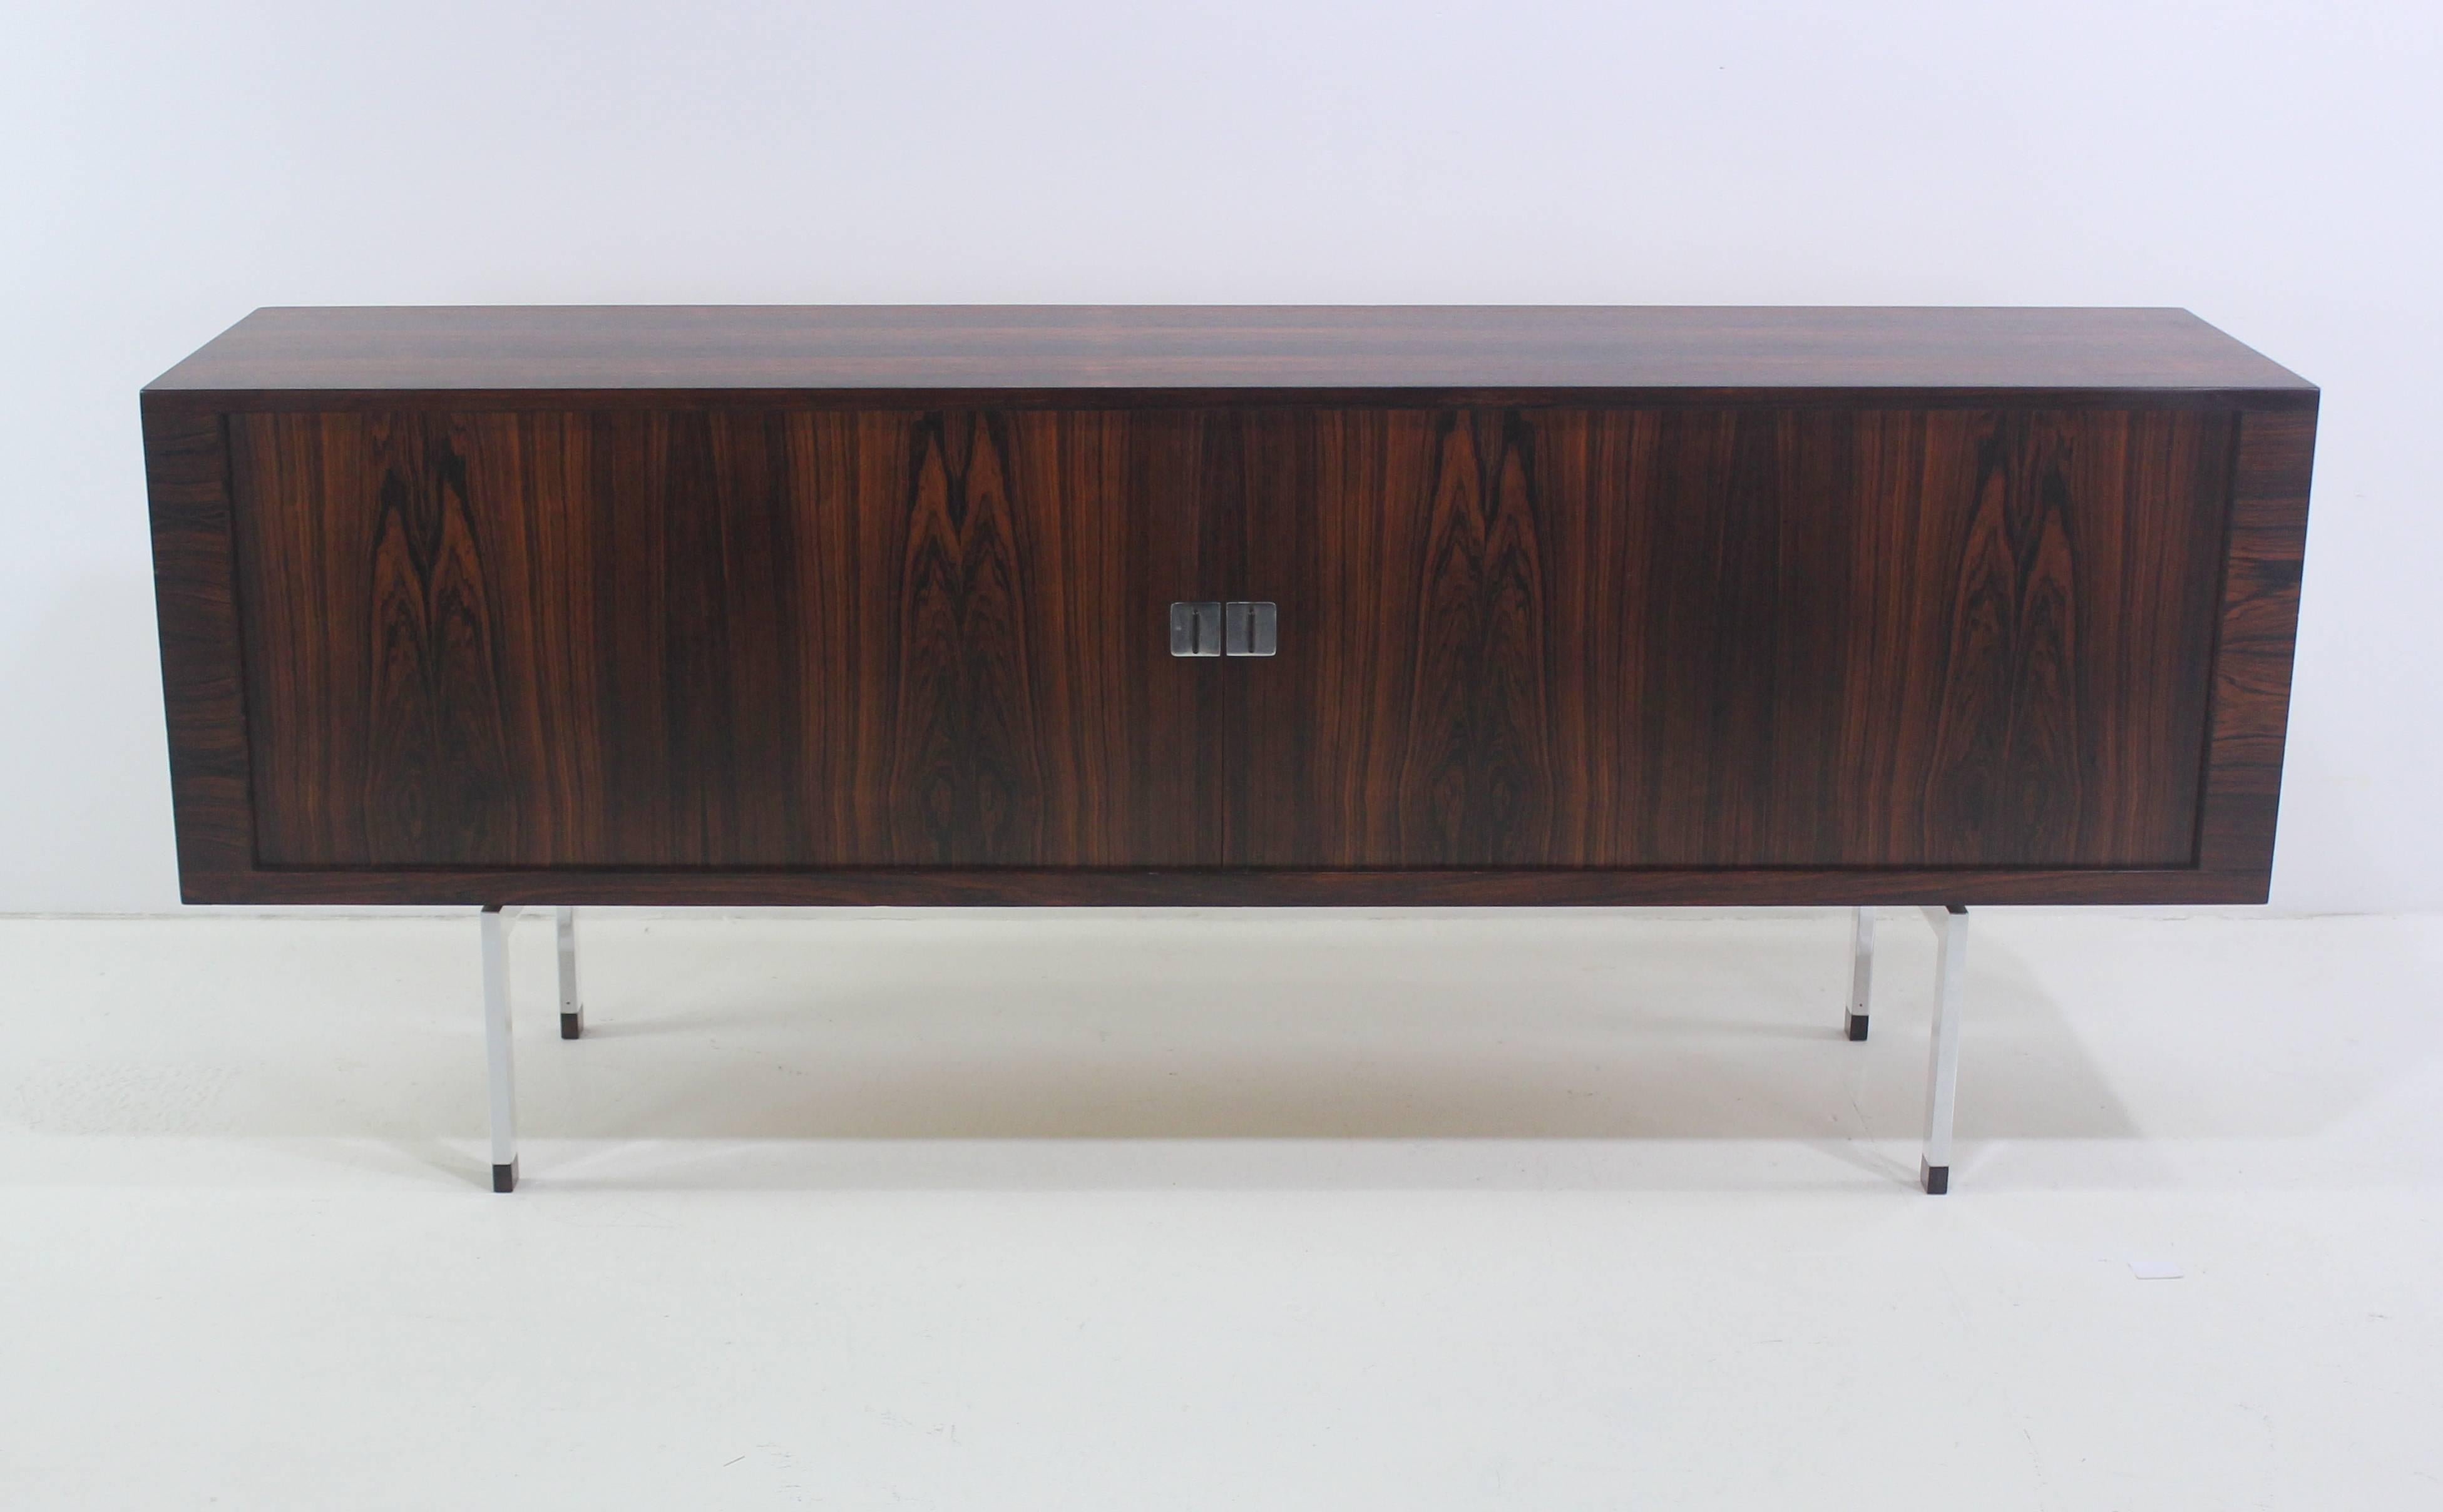 Danish modern credenza designed by Hans Wegner.
A timeless Classic made in the late 1950s by Ry Mobler.
Richly grained wraparound rosewood. Oak interior.
Polished steel legs with rosewood socks.
Tambour doors with extraordinary square pulls